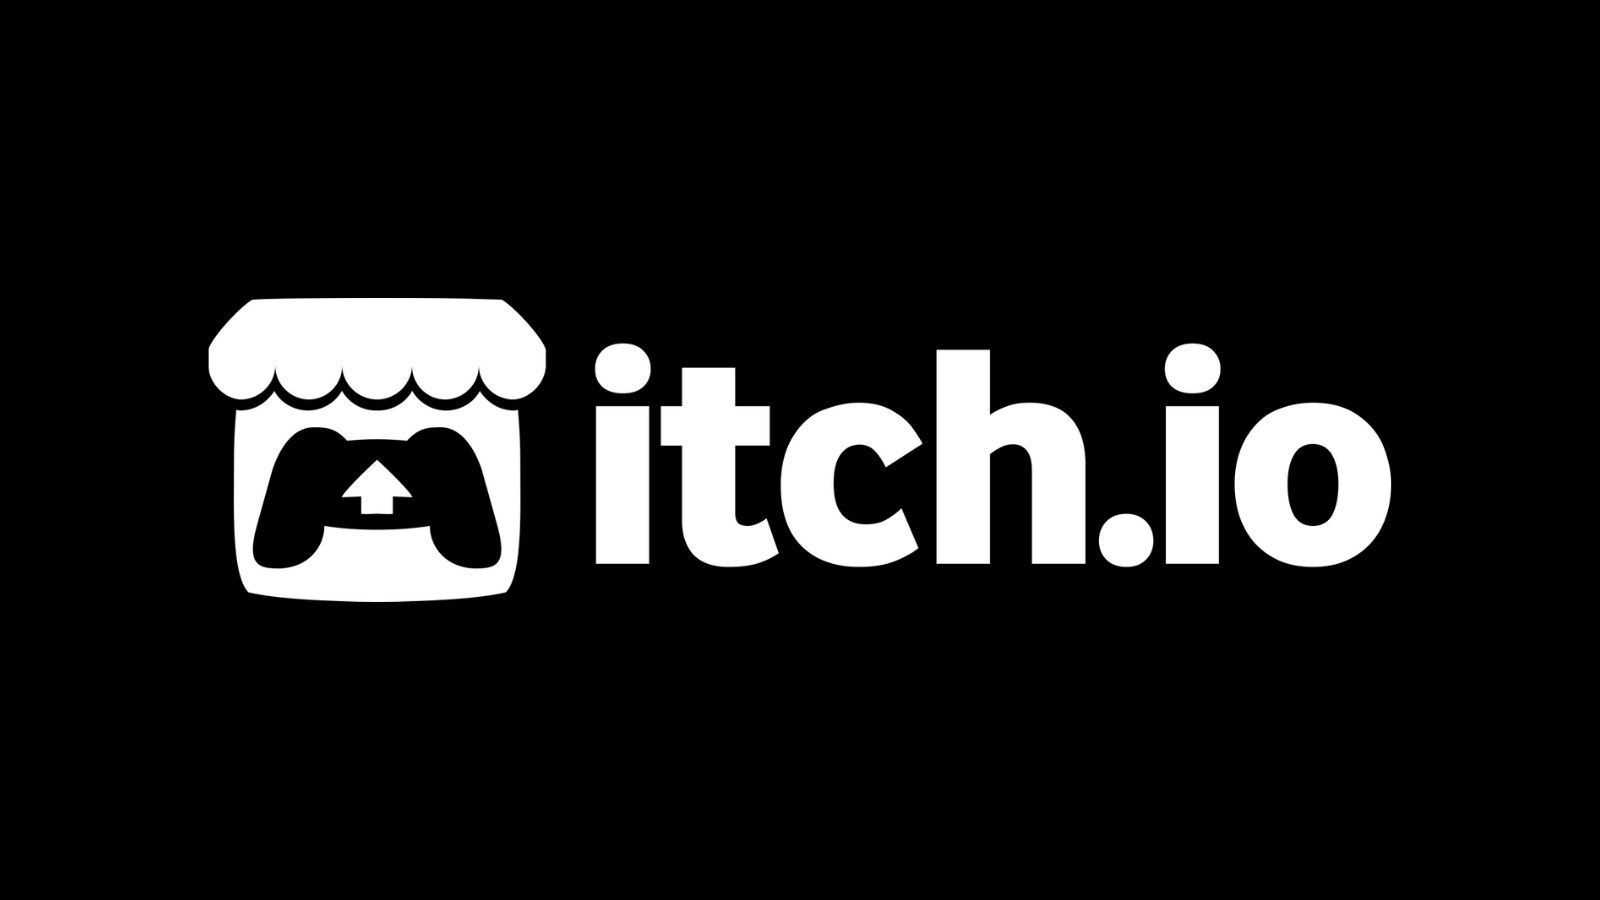 The itch desktop client is now available on the Epic Games Store